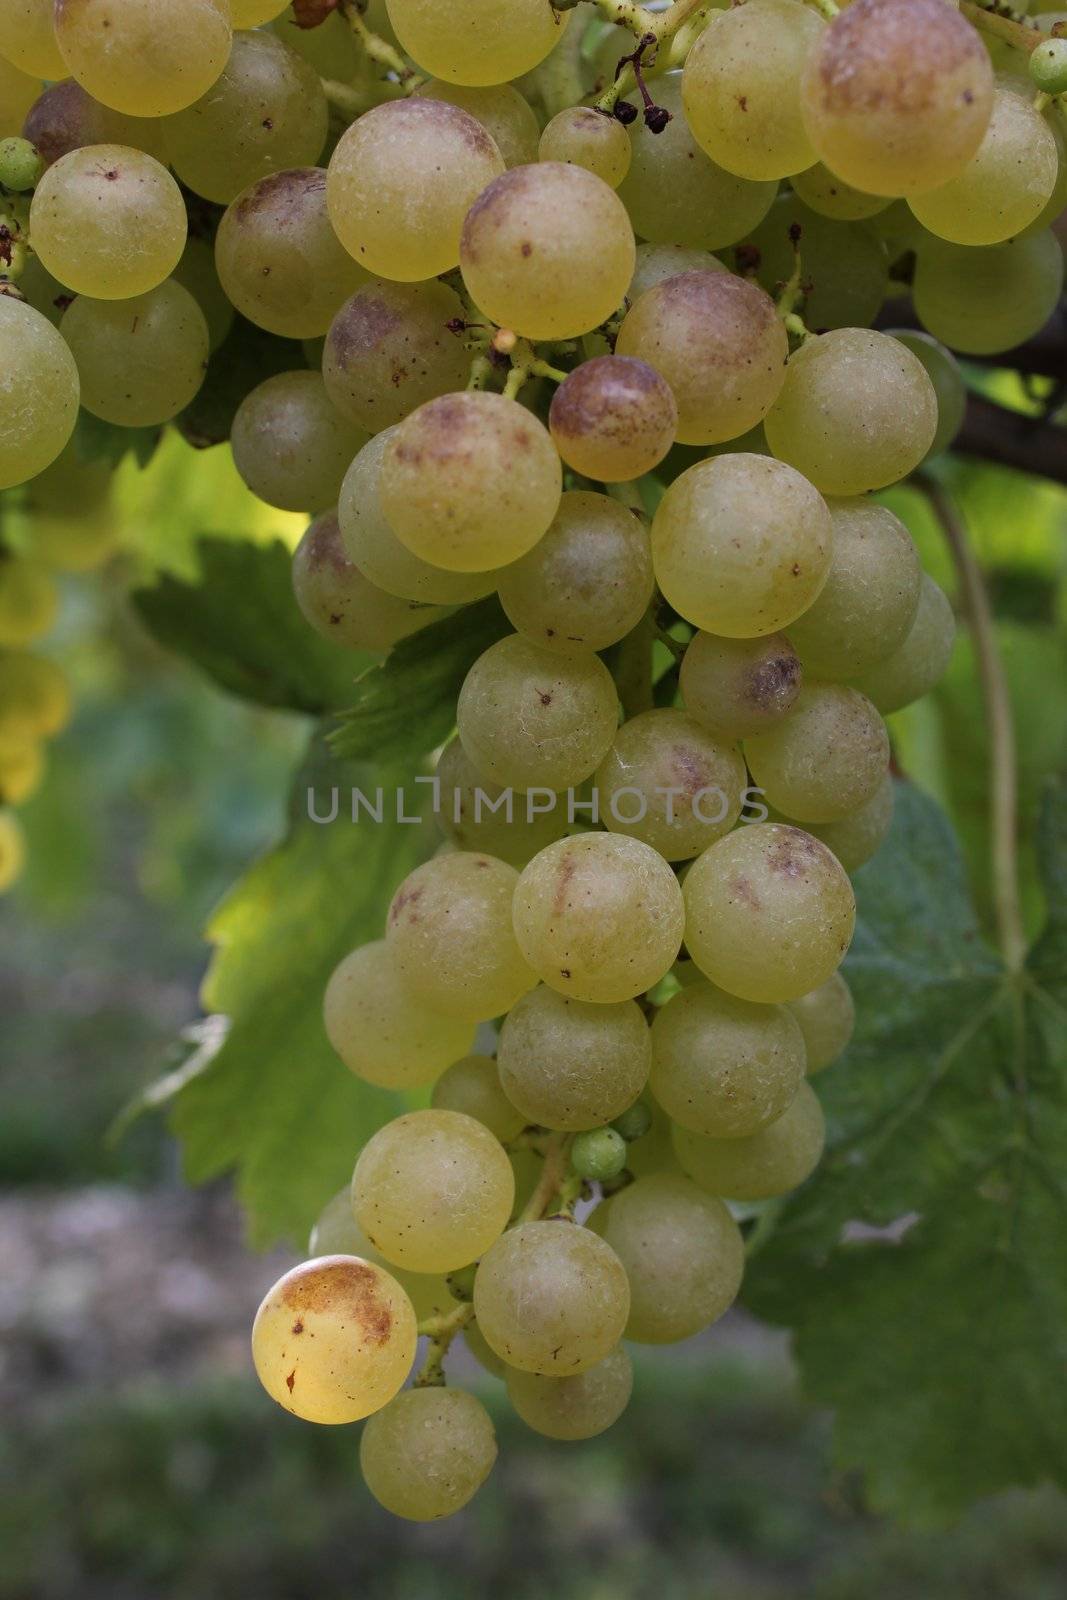 grapes by mariephotos